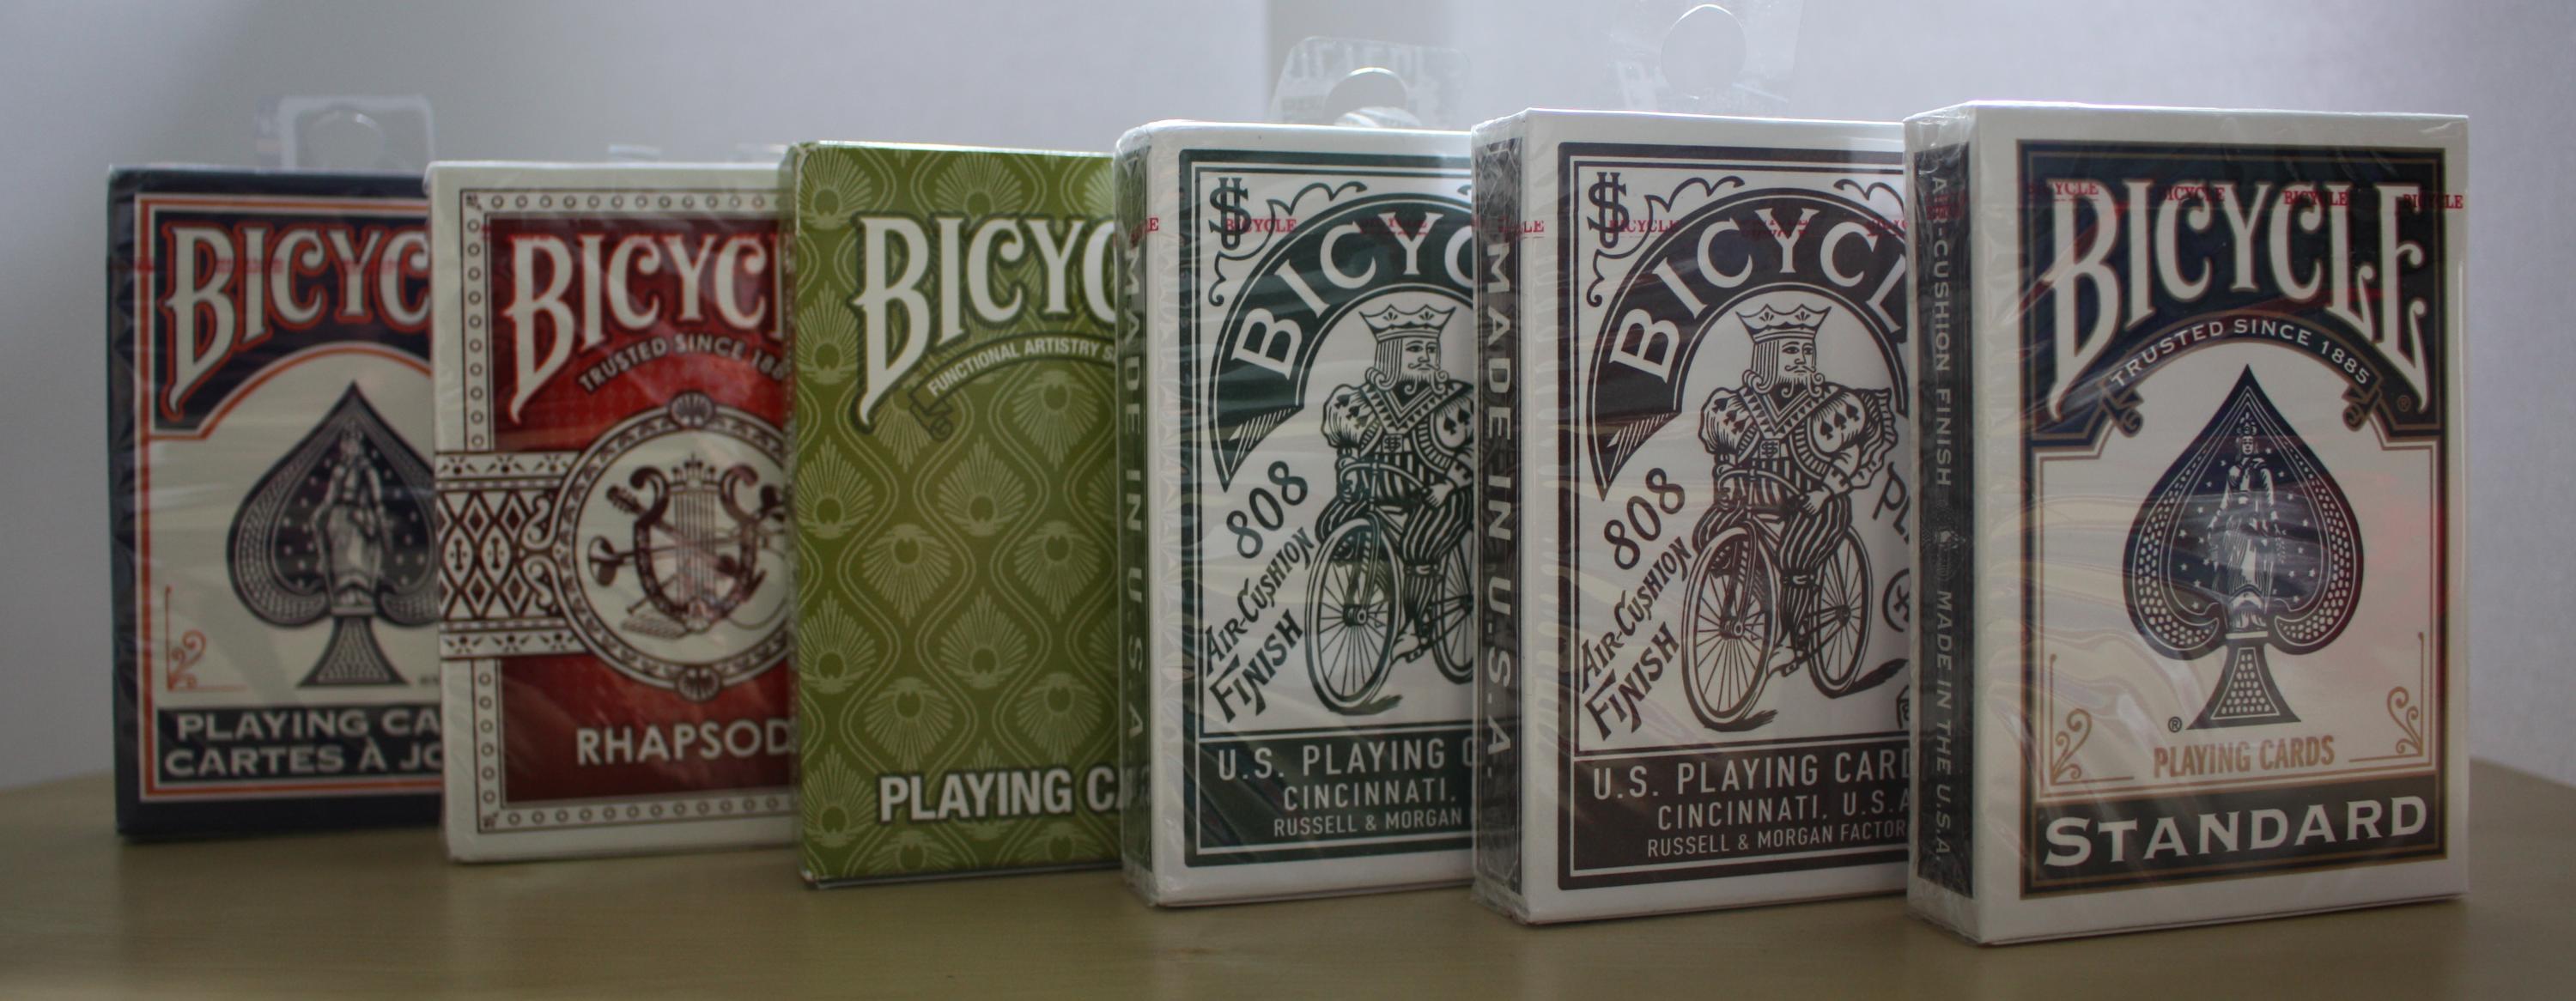 usa bicycle cards in supermarket group